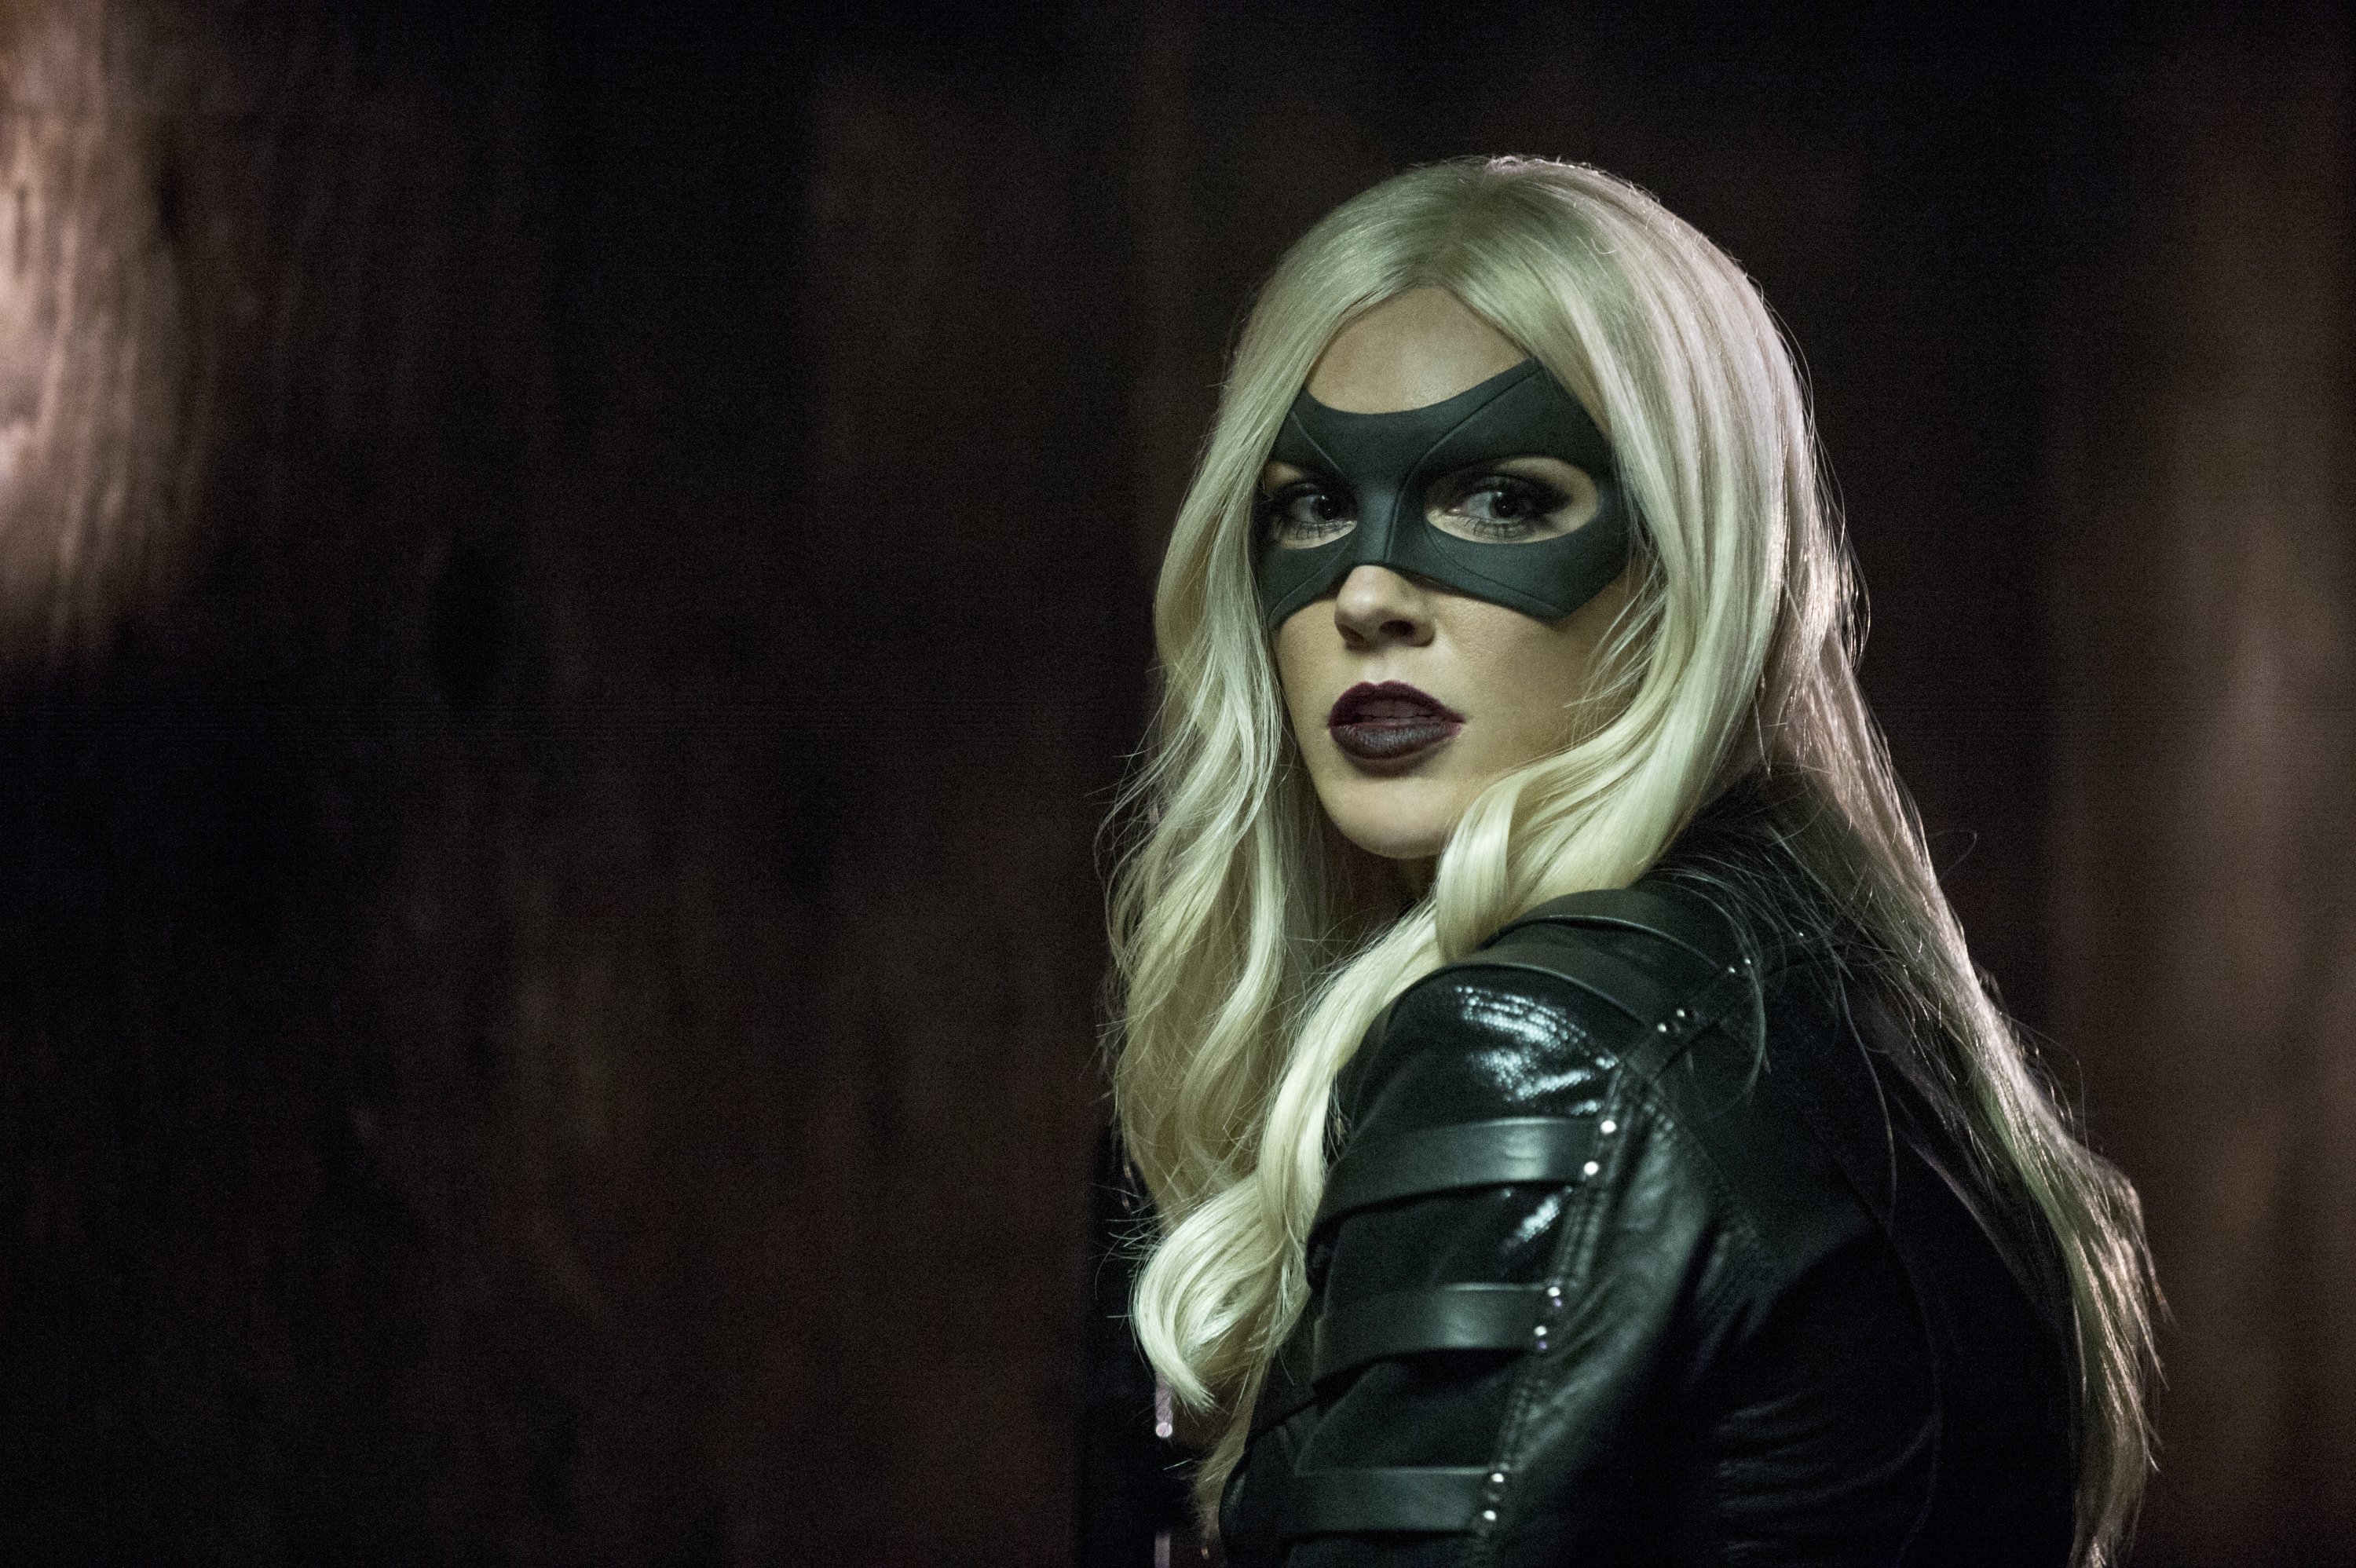 Arrow Katie Cassidy Black Canary Wallpaper Laurel Lance Arrowverse Black Canary 1659836 Hd Wallpaper Backgrounds Download Desktop pc, laptop, mac, iphone, ipad, android mobiles, tablets privacy policy | terms of. laurel lance arrowverse black canary